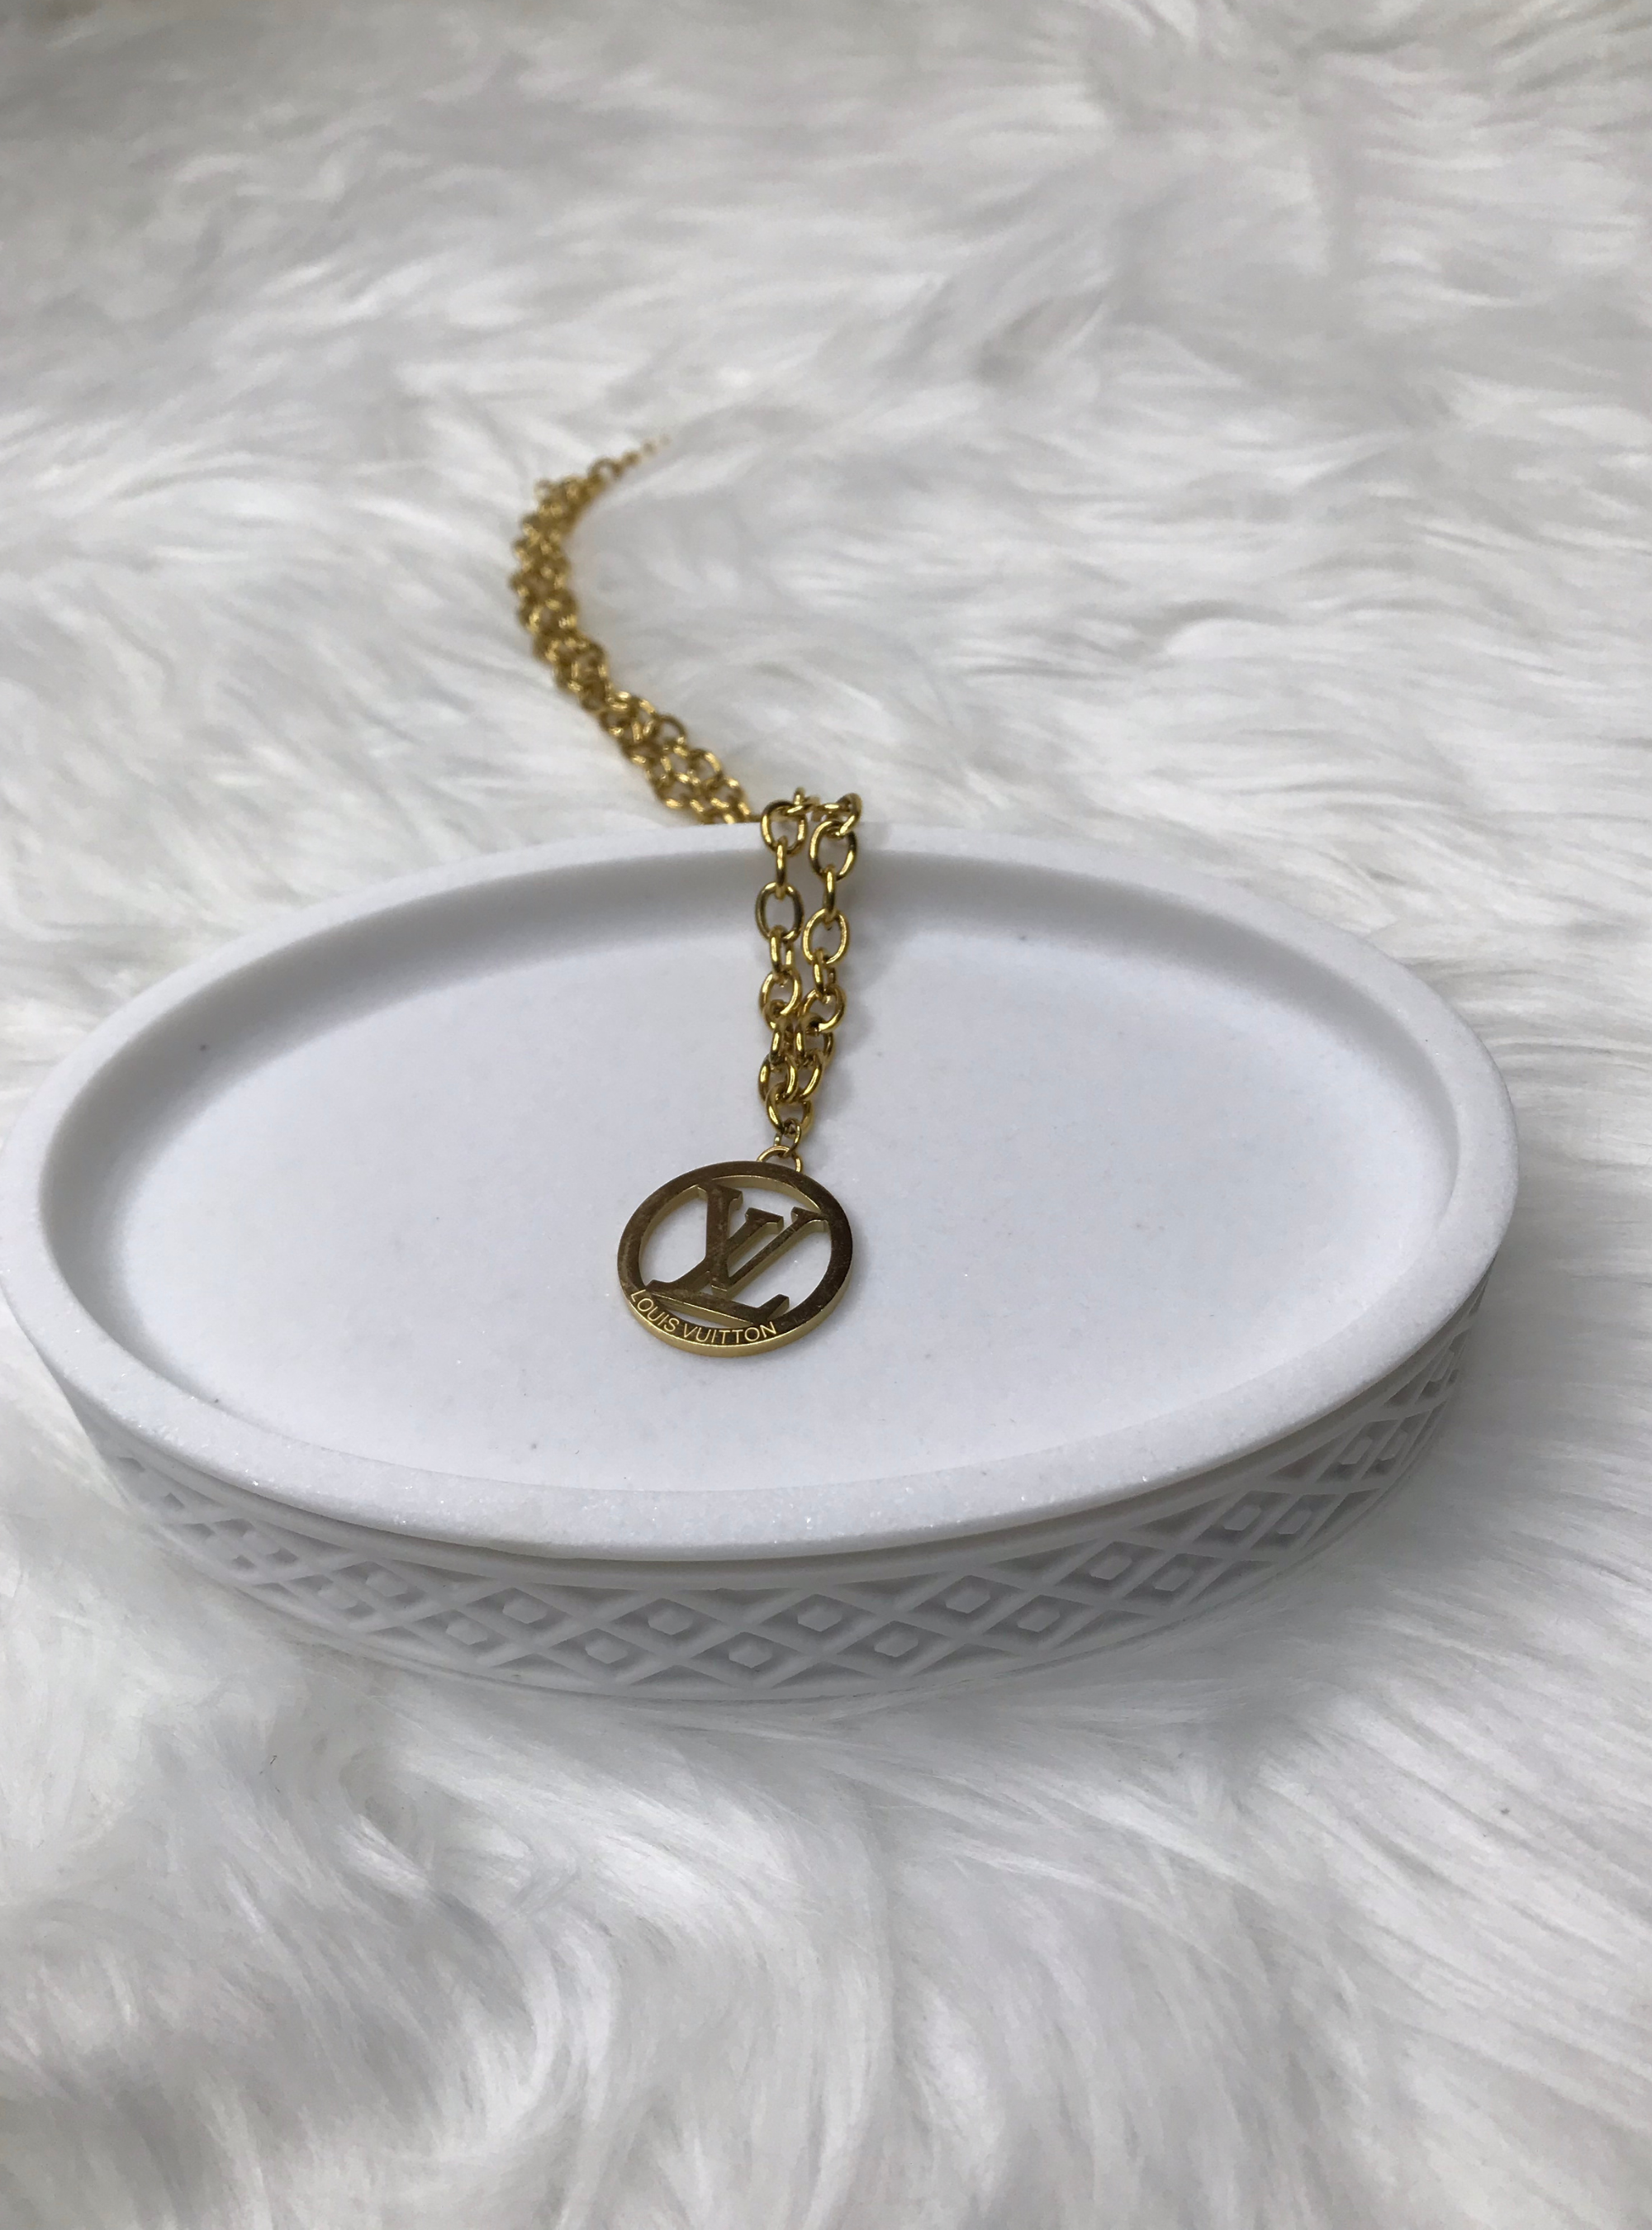 Louis Vuitton Necklaces, Pre-Owned LV Jewelry for Women